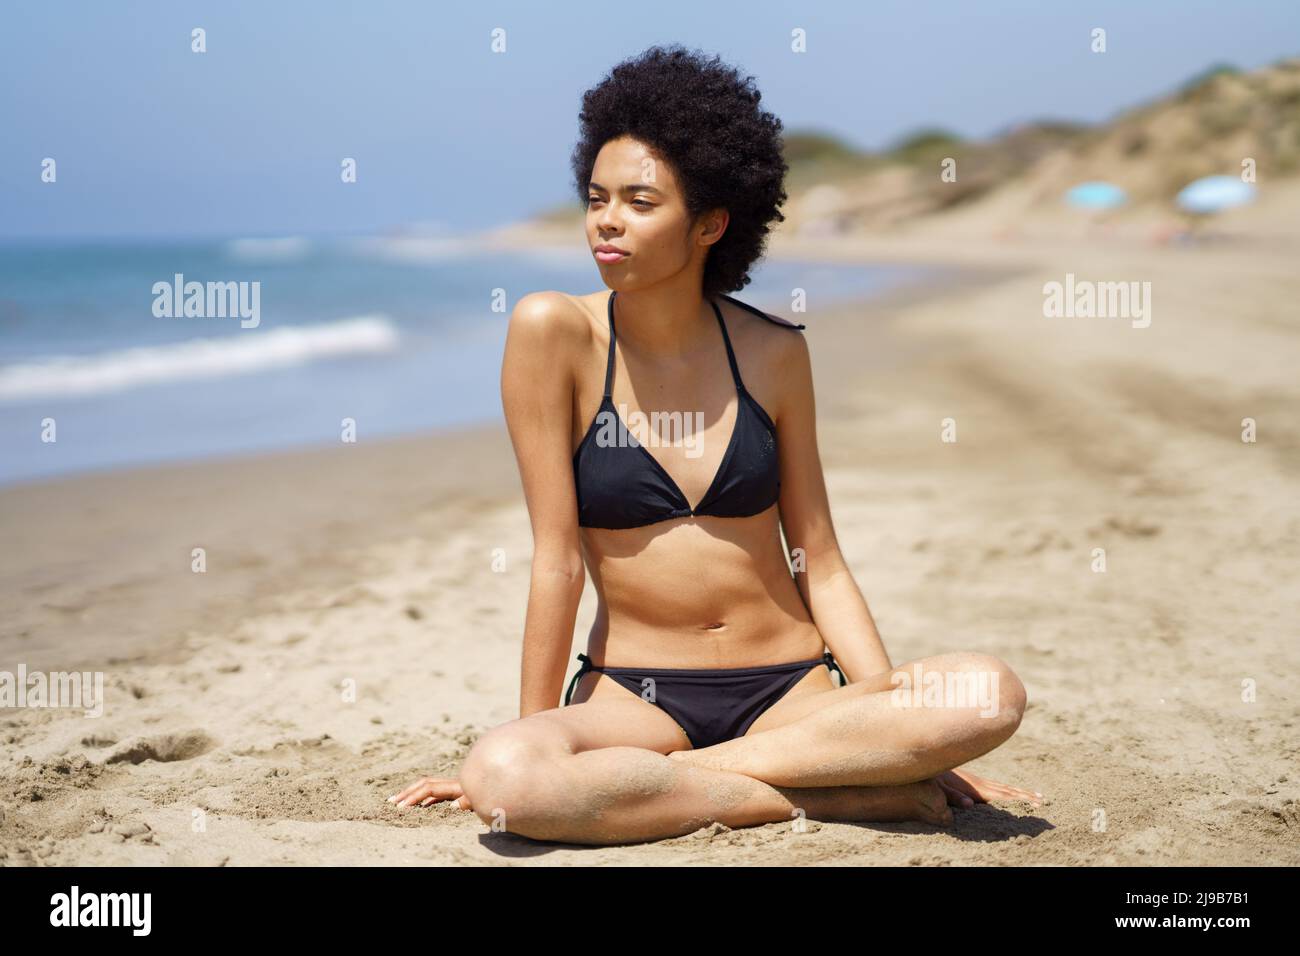 Relaxed black woman in bikini sitting on the sand of a tropical beach looking out to sea. Stock Photo